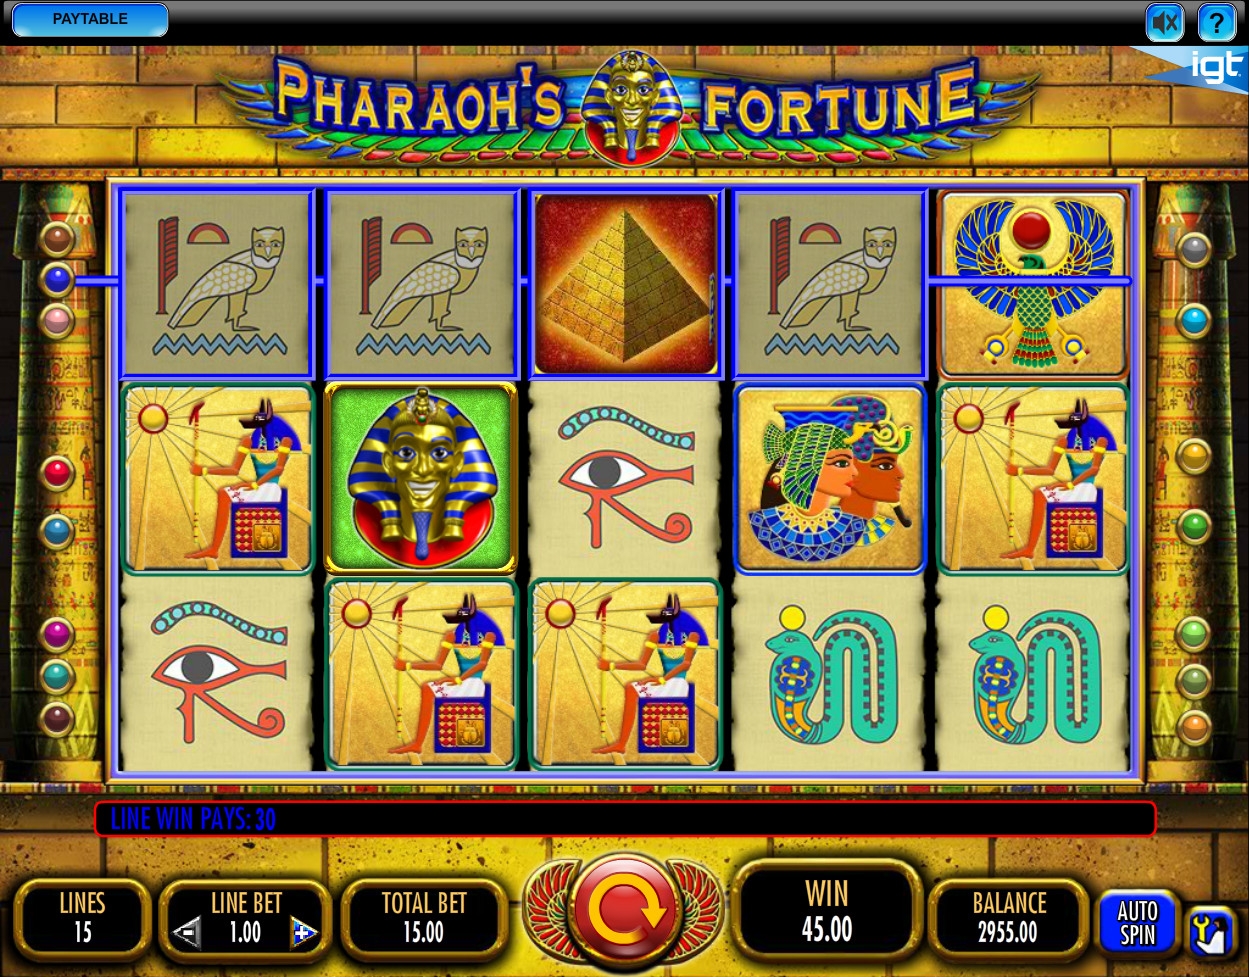 Pharaoh’s Fortune (Pharaoh’s Fortune) from category Slots